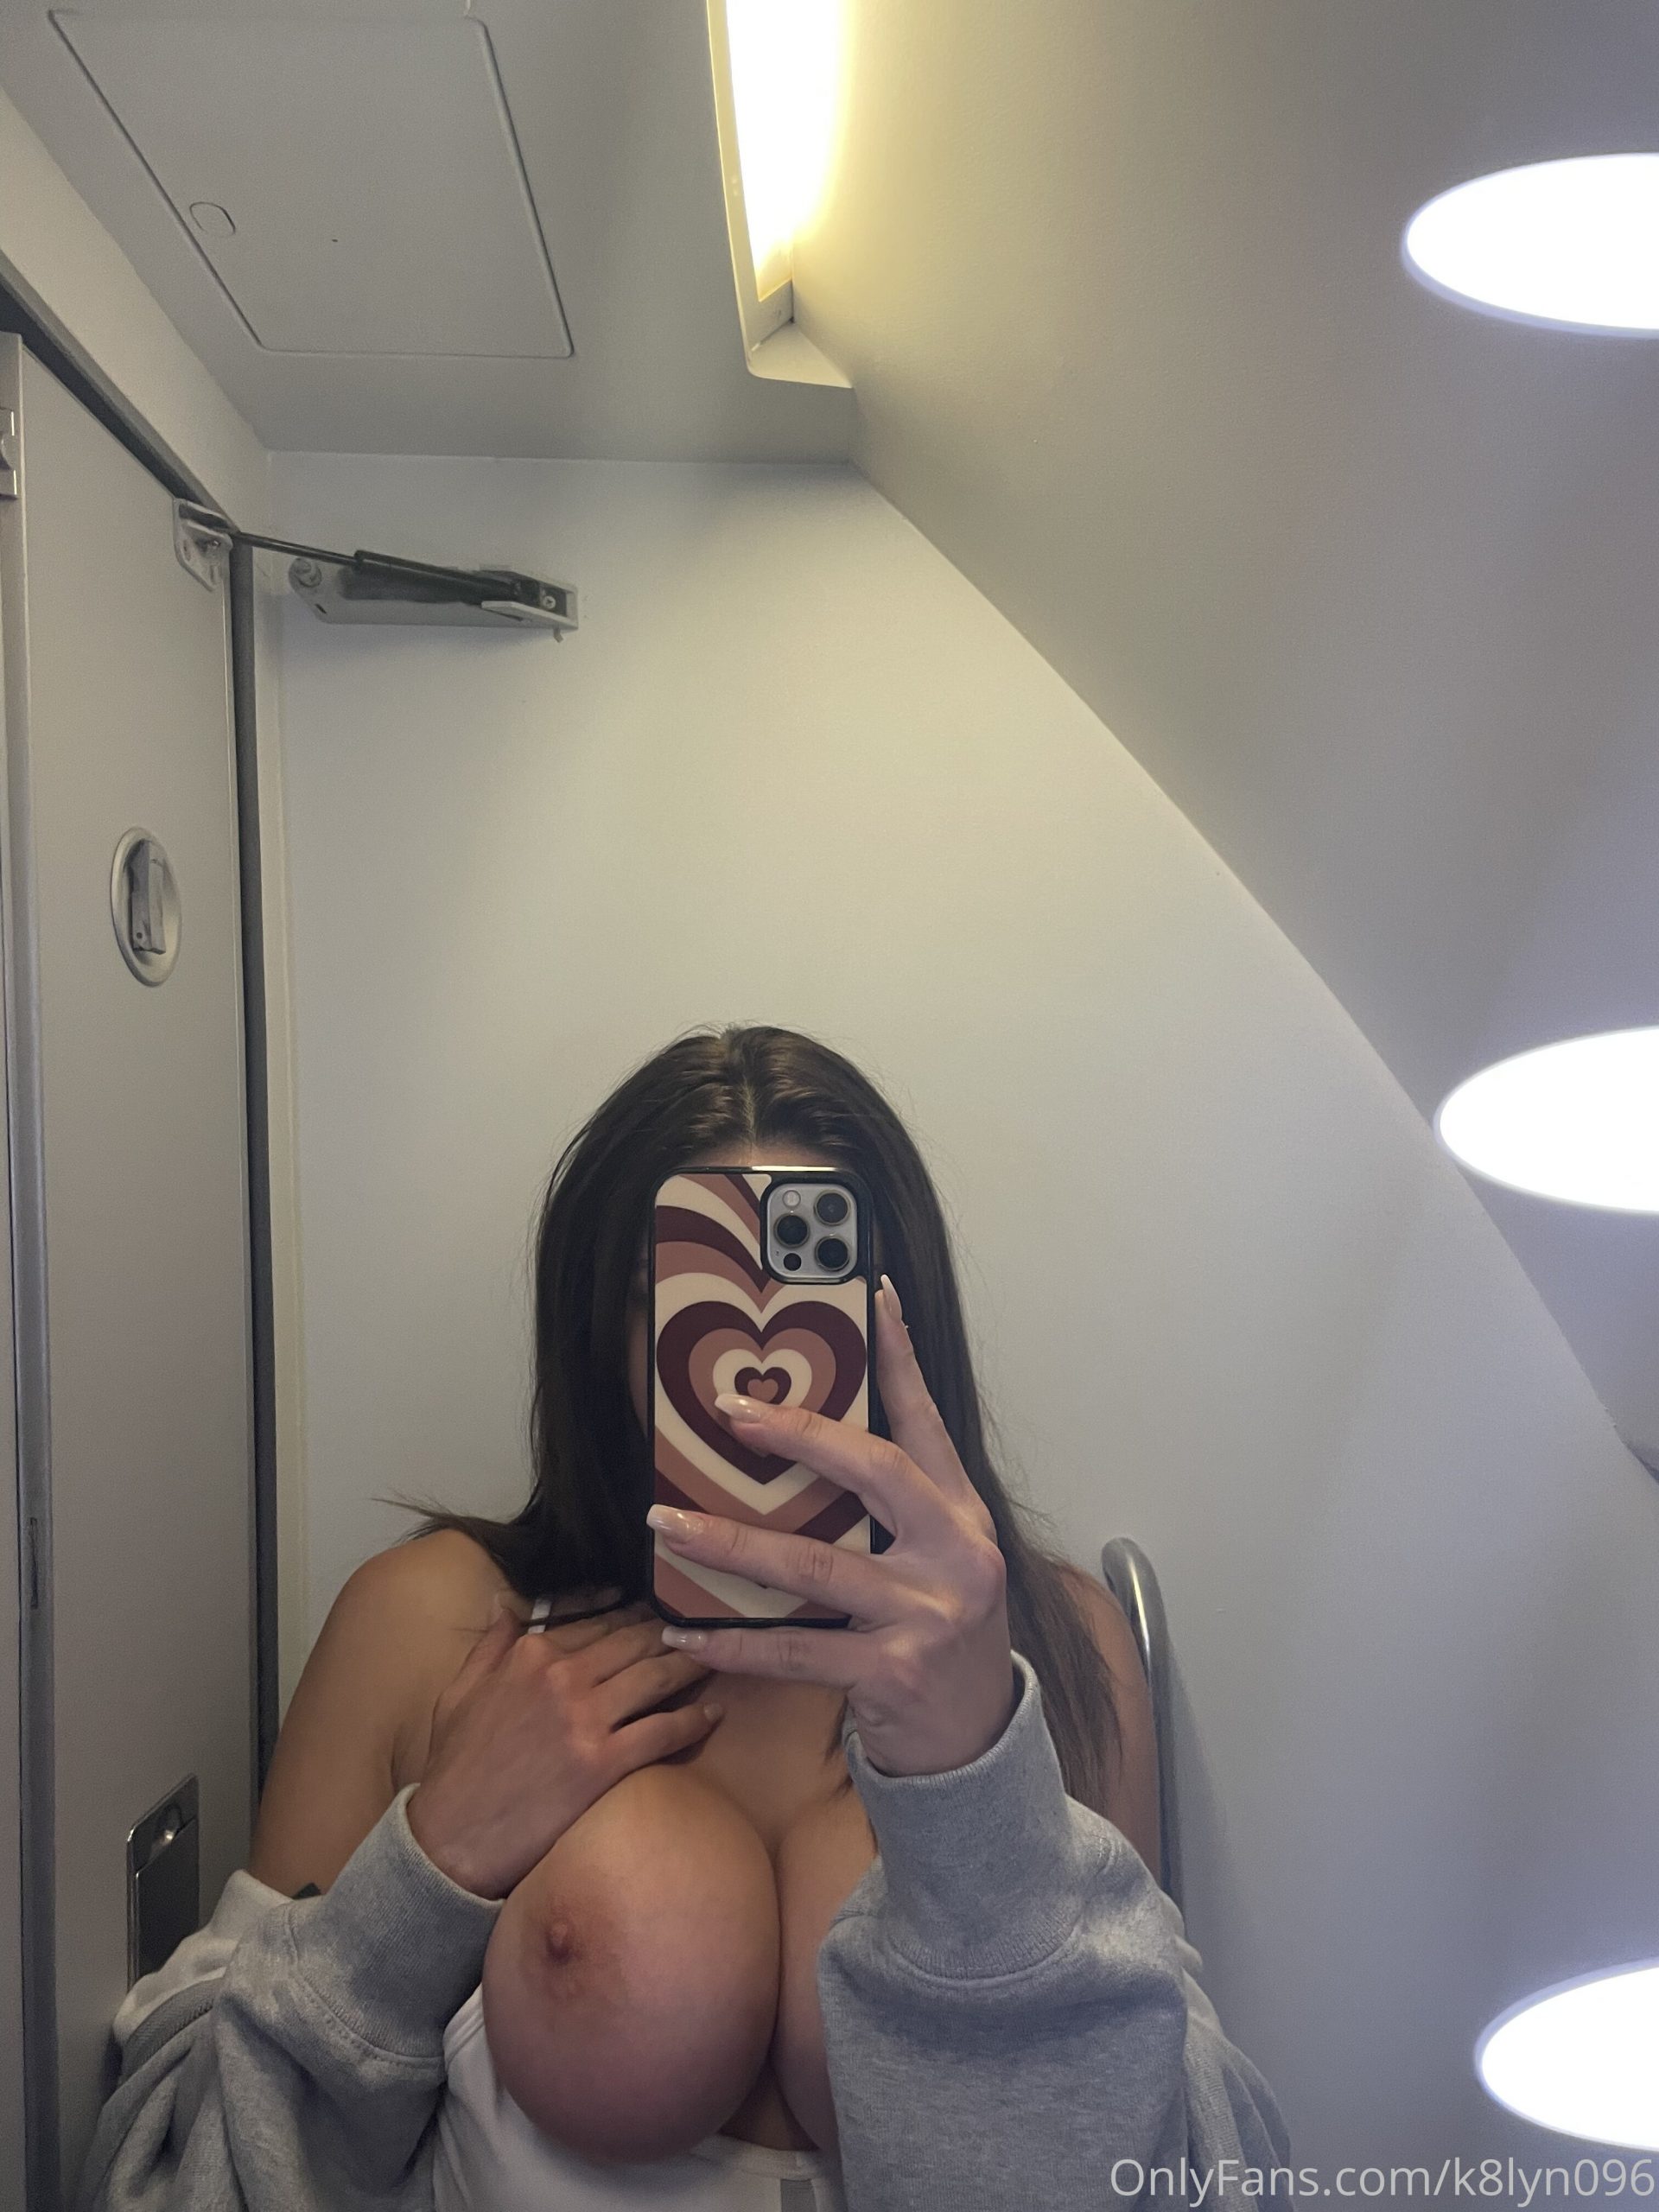 K8lyn096 - Busty Babe Onlyfans Sextapes Nudes - Celebs News.